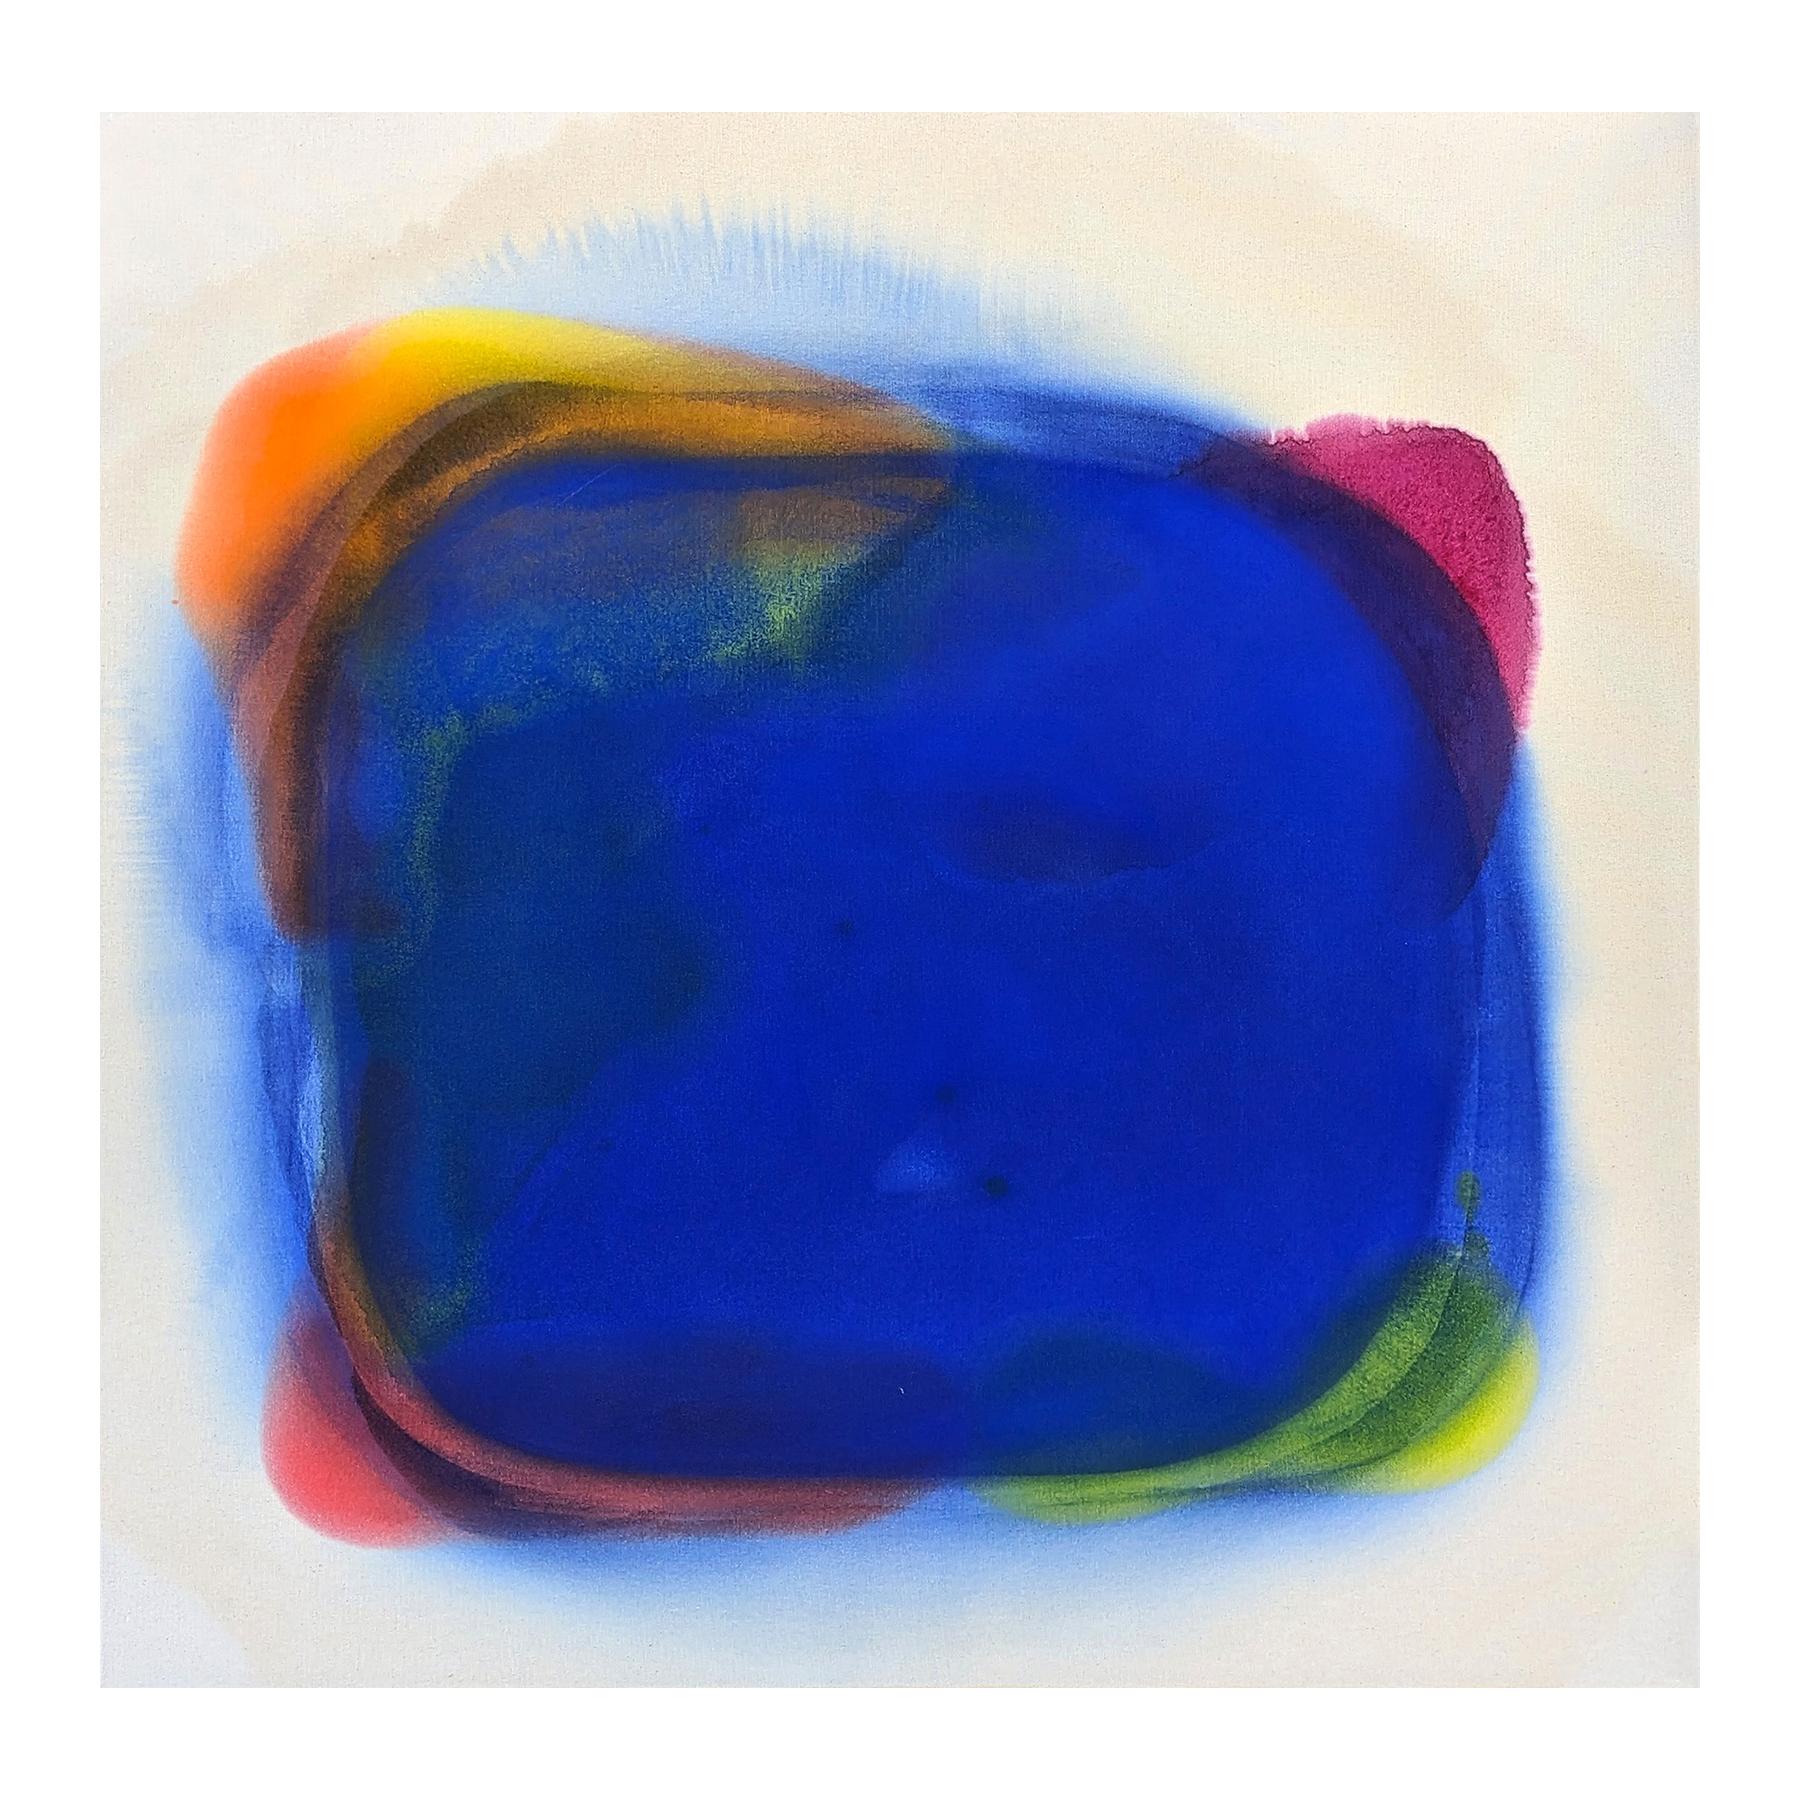 Contemporary abstract painting by Houston-based artist Gary Griffin. The work features a central amorphous shape created with diffused layers of blue, pink, yellow, and orange paint against an off-white background. Signed, titled, and dated on the